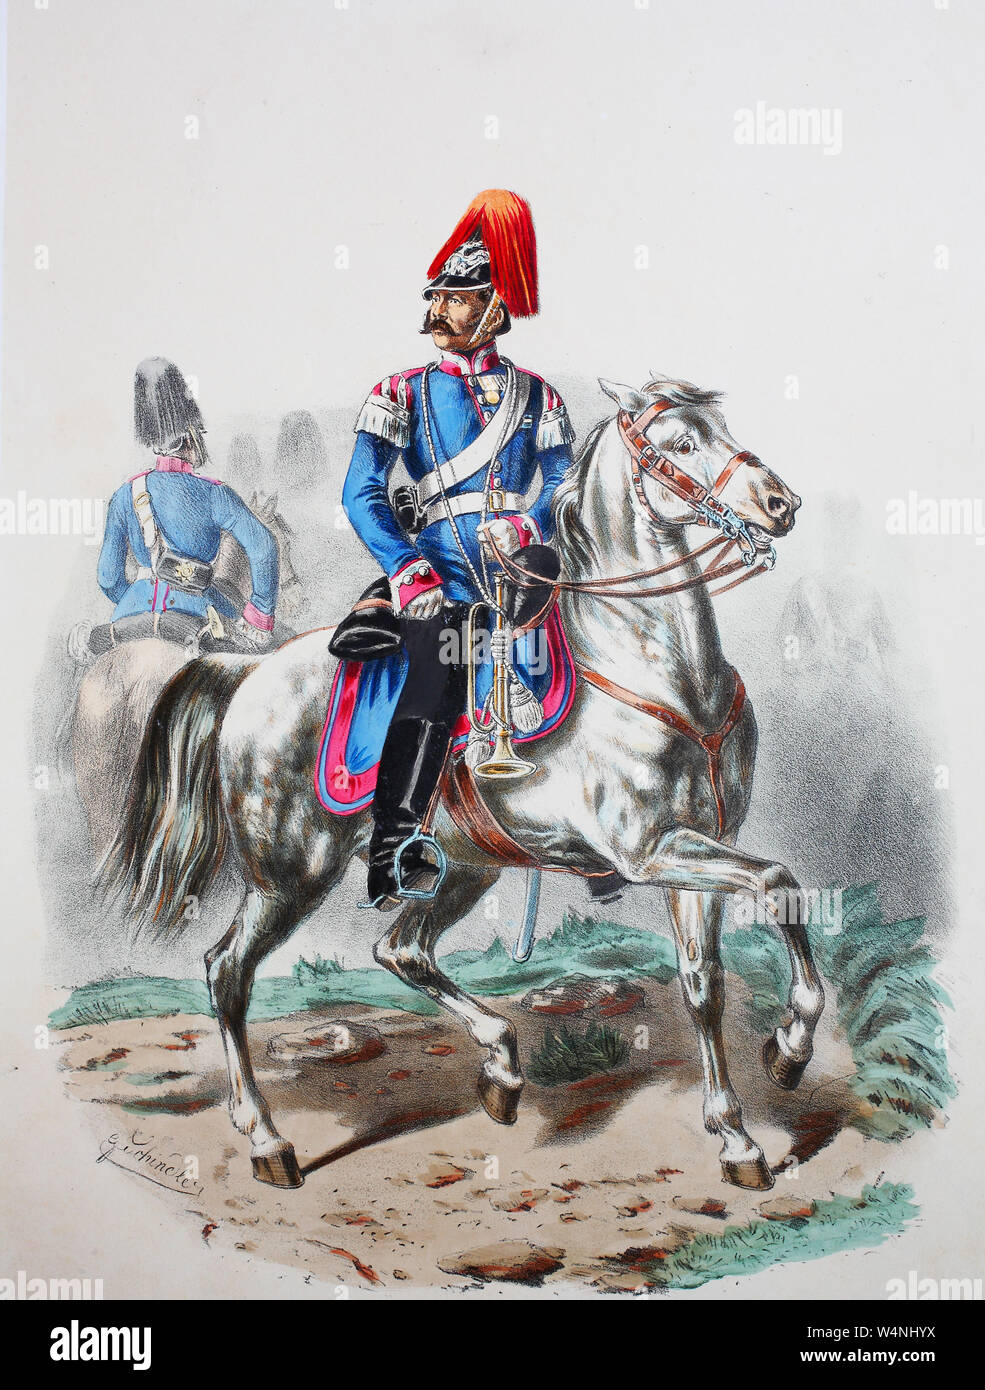 Royal Prussian Army, Guards Corps, Preußens Heer, preussische Garde, Neumärkisches Dragoner Regiment, No.3, Stabs Trompeter, Digital improved reproduction of an illustration from the 19th century Stock Photo